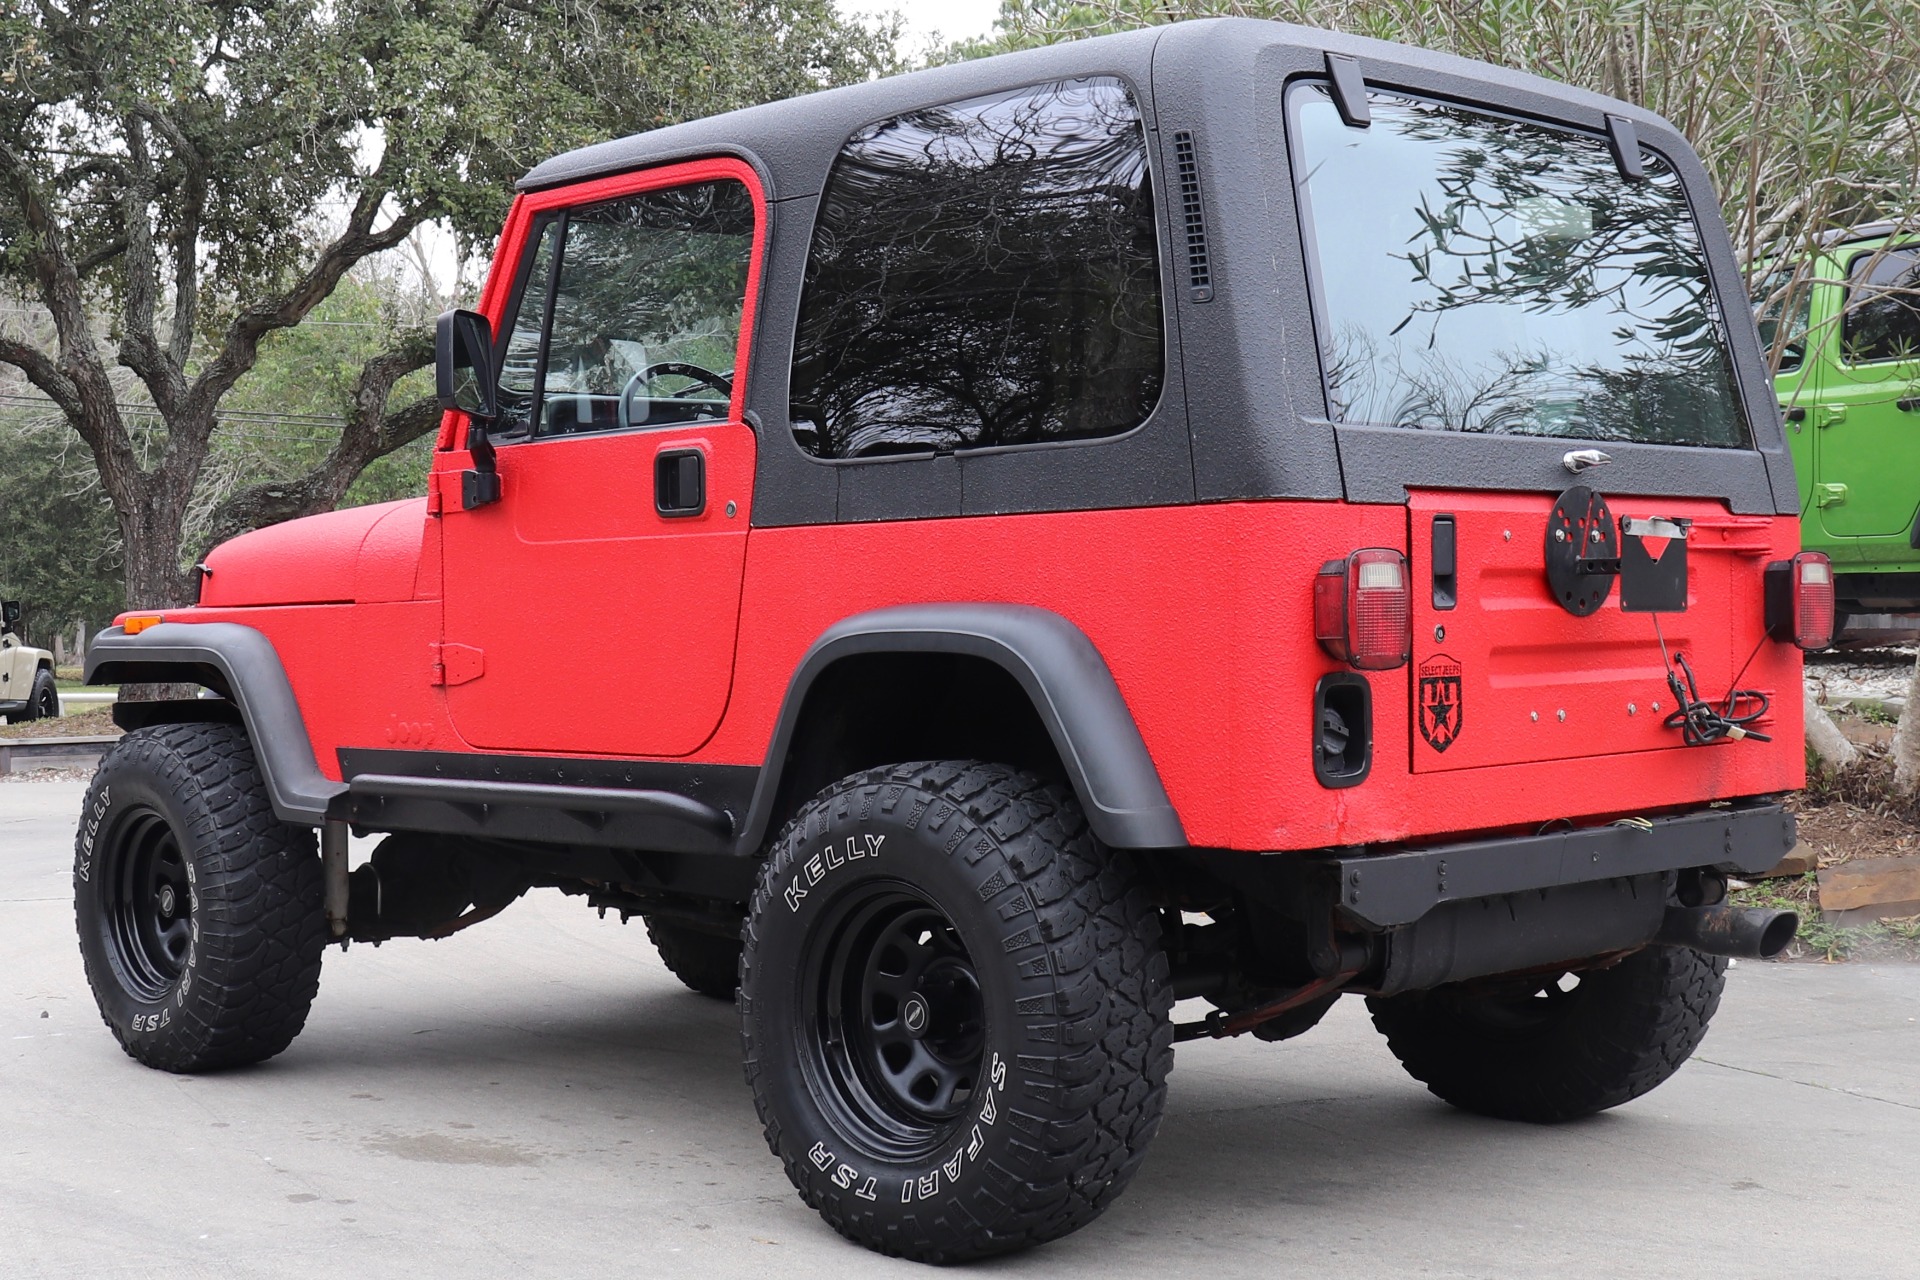 Used 1995 Jeep Wrangler S For Sale ($7,995) | Select Jeeps Inc. Stock  #317260